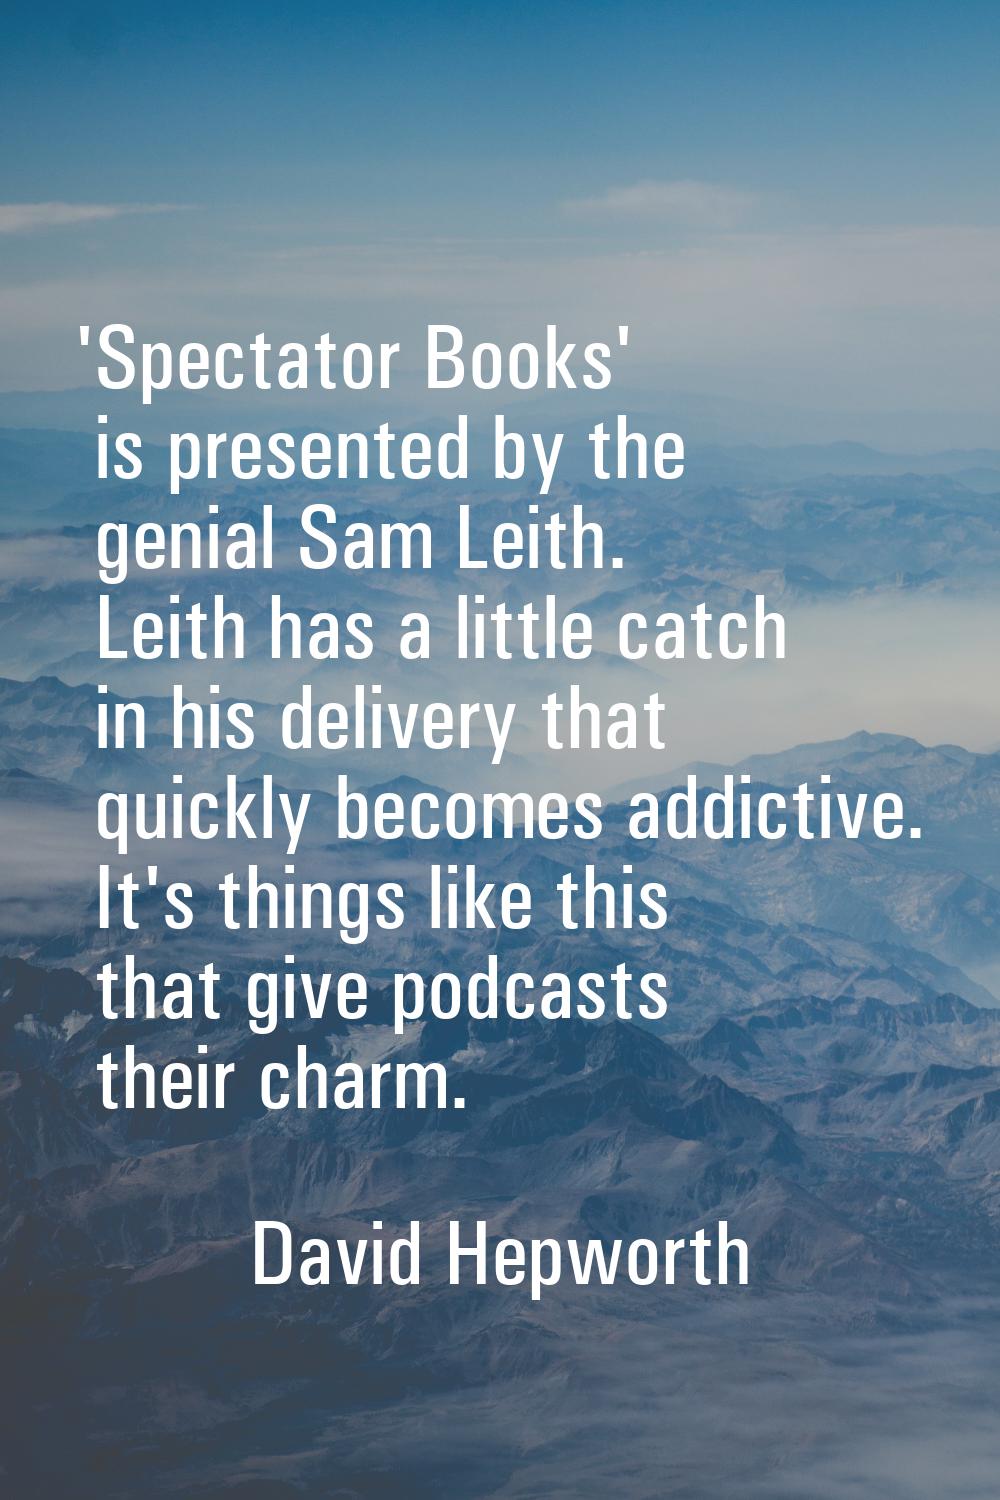 'Spectator Books' is presented by the genial Sam Leith. Leith has a little catch in his delivery th